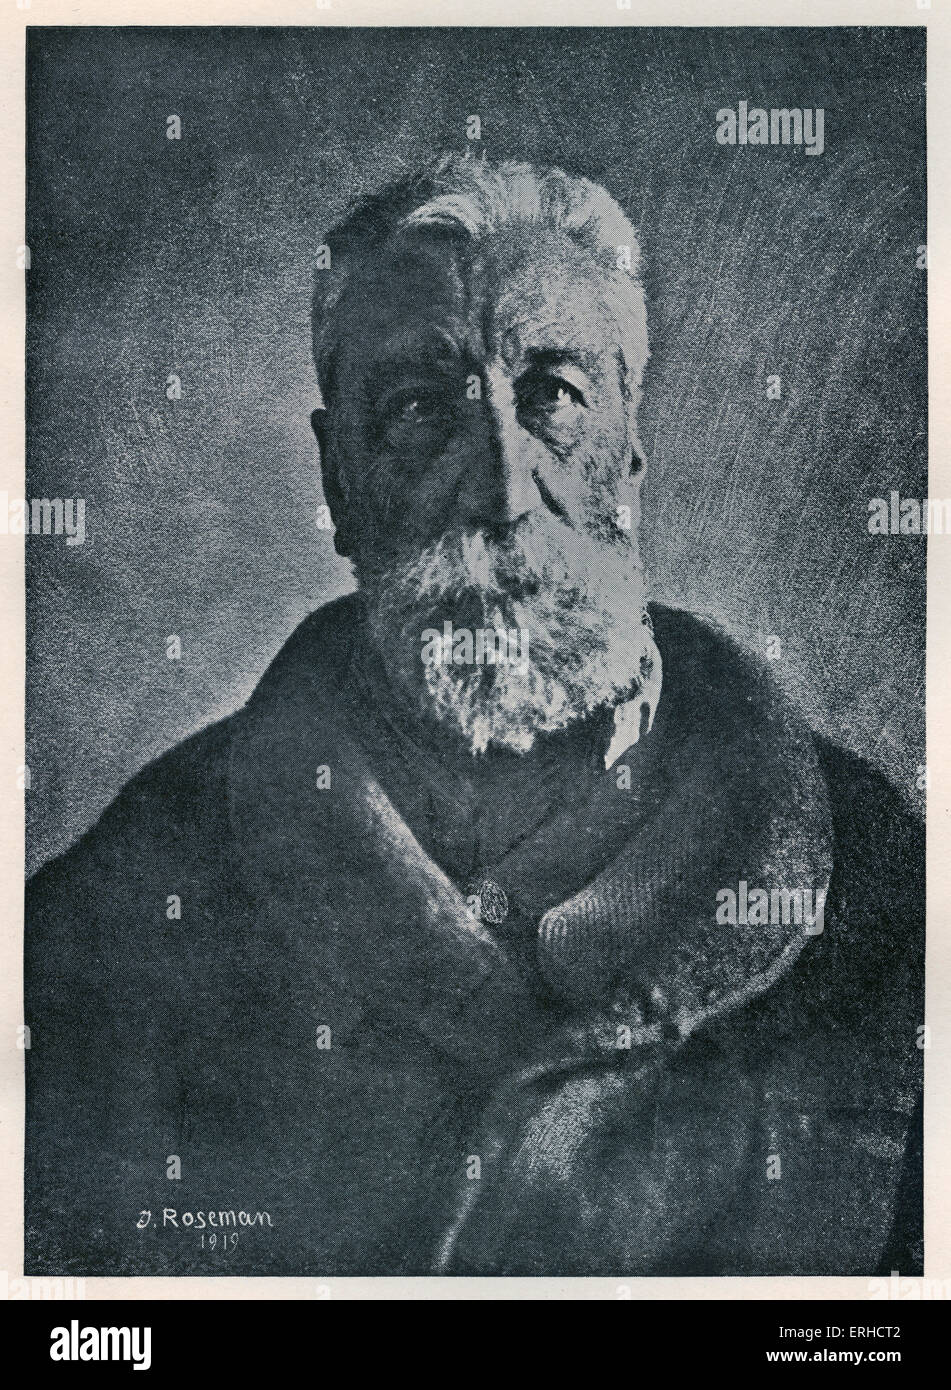 Anatole France, portrait, 1919. French poet, journalist, and novelist, winner of the 1921 Nobel Prize for Literature, 16 April 1844 – 12 October 1924. Stock Photo